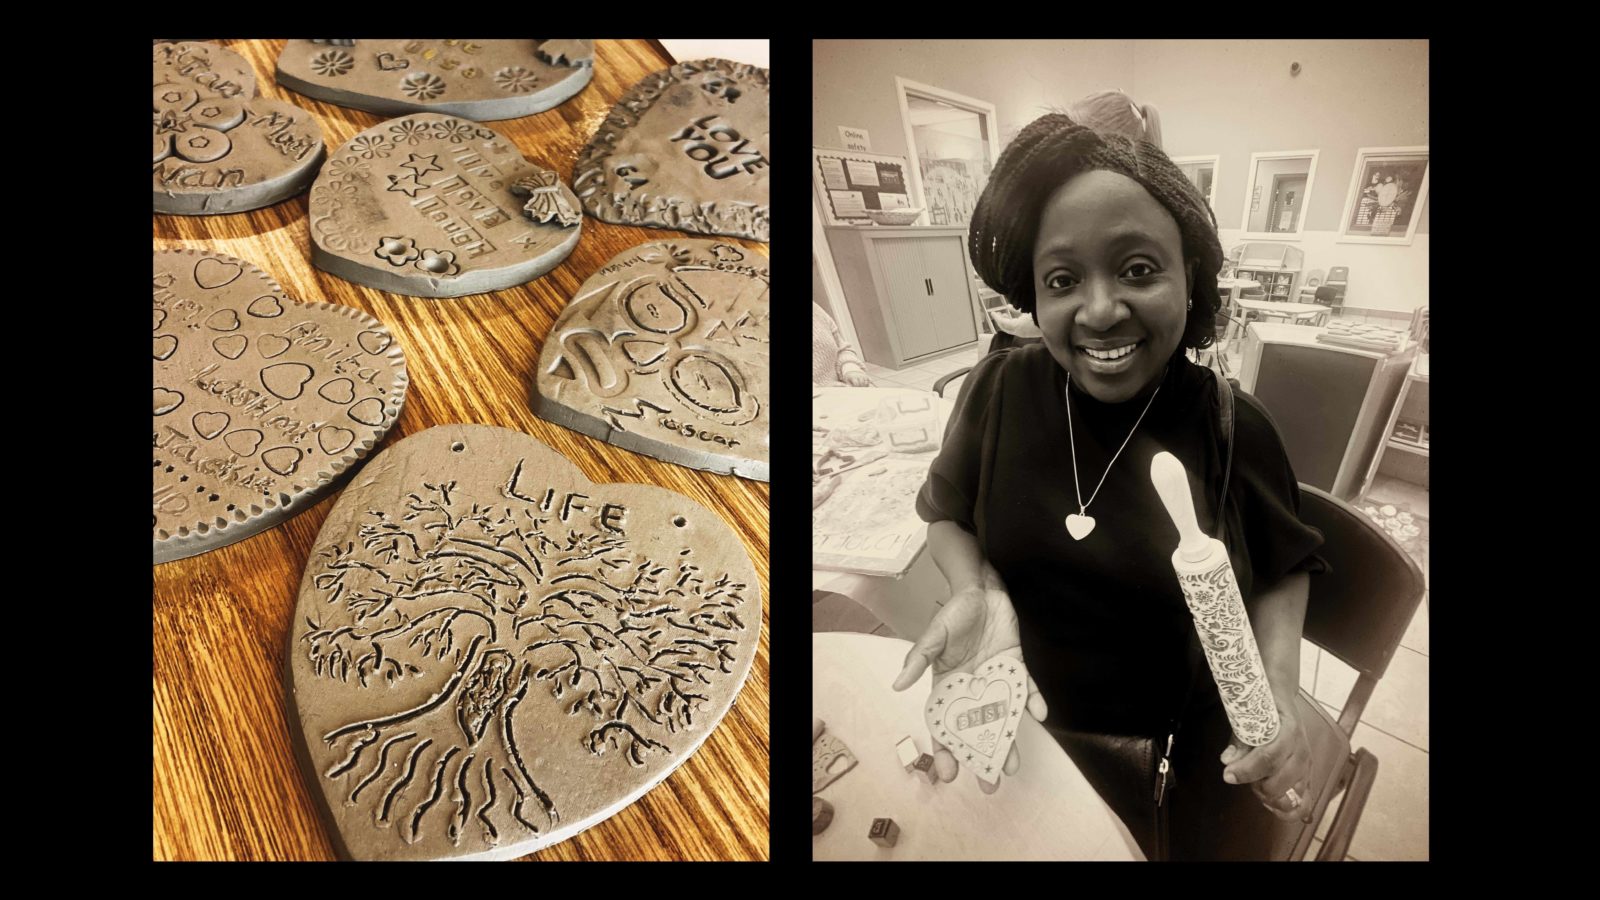 On the left is an image of some unfired clay hearts, and on the right is an image of councillor Bisi Osundeko holding a clay heart and a rolling pin, smiling at the camera.